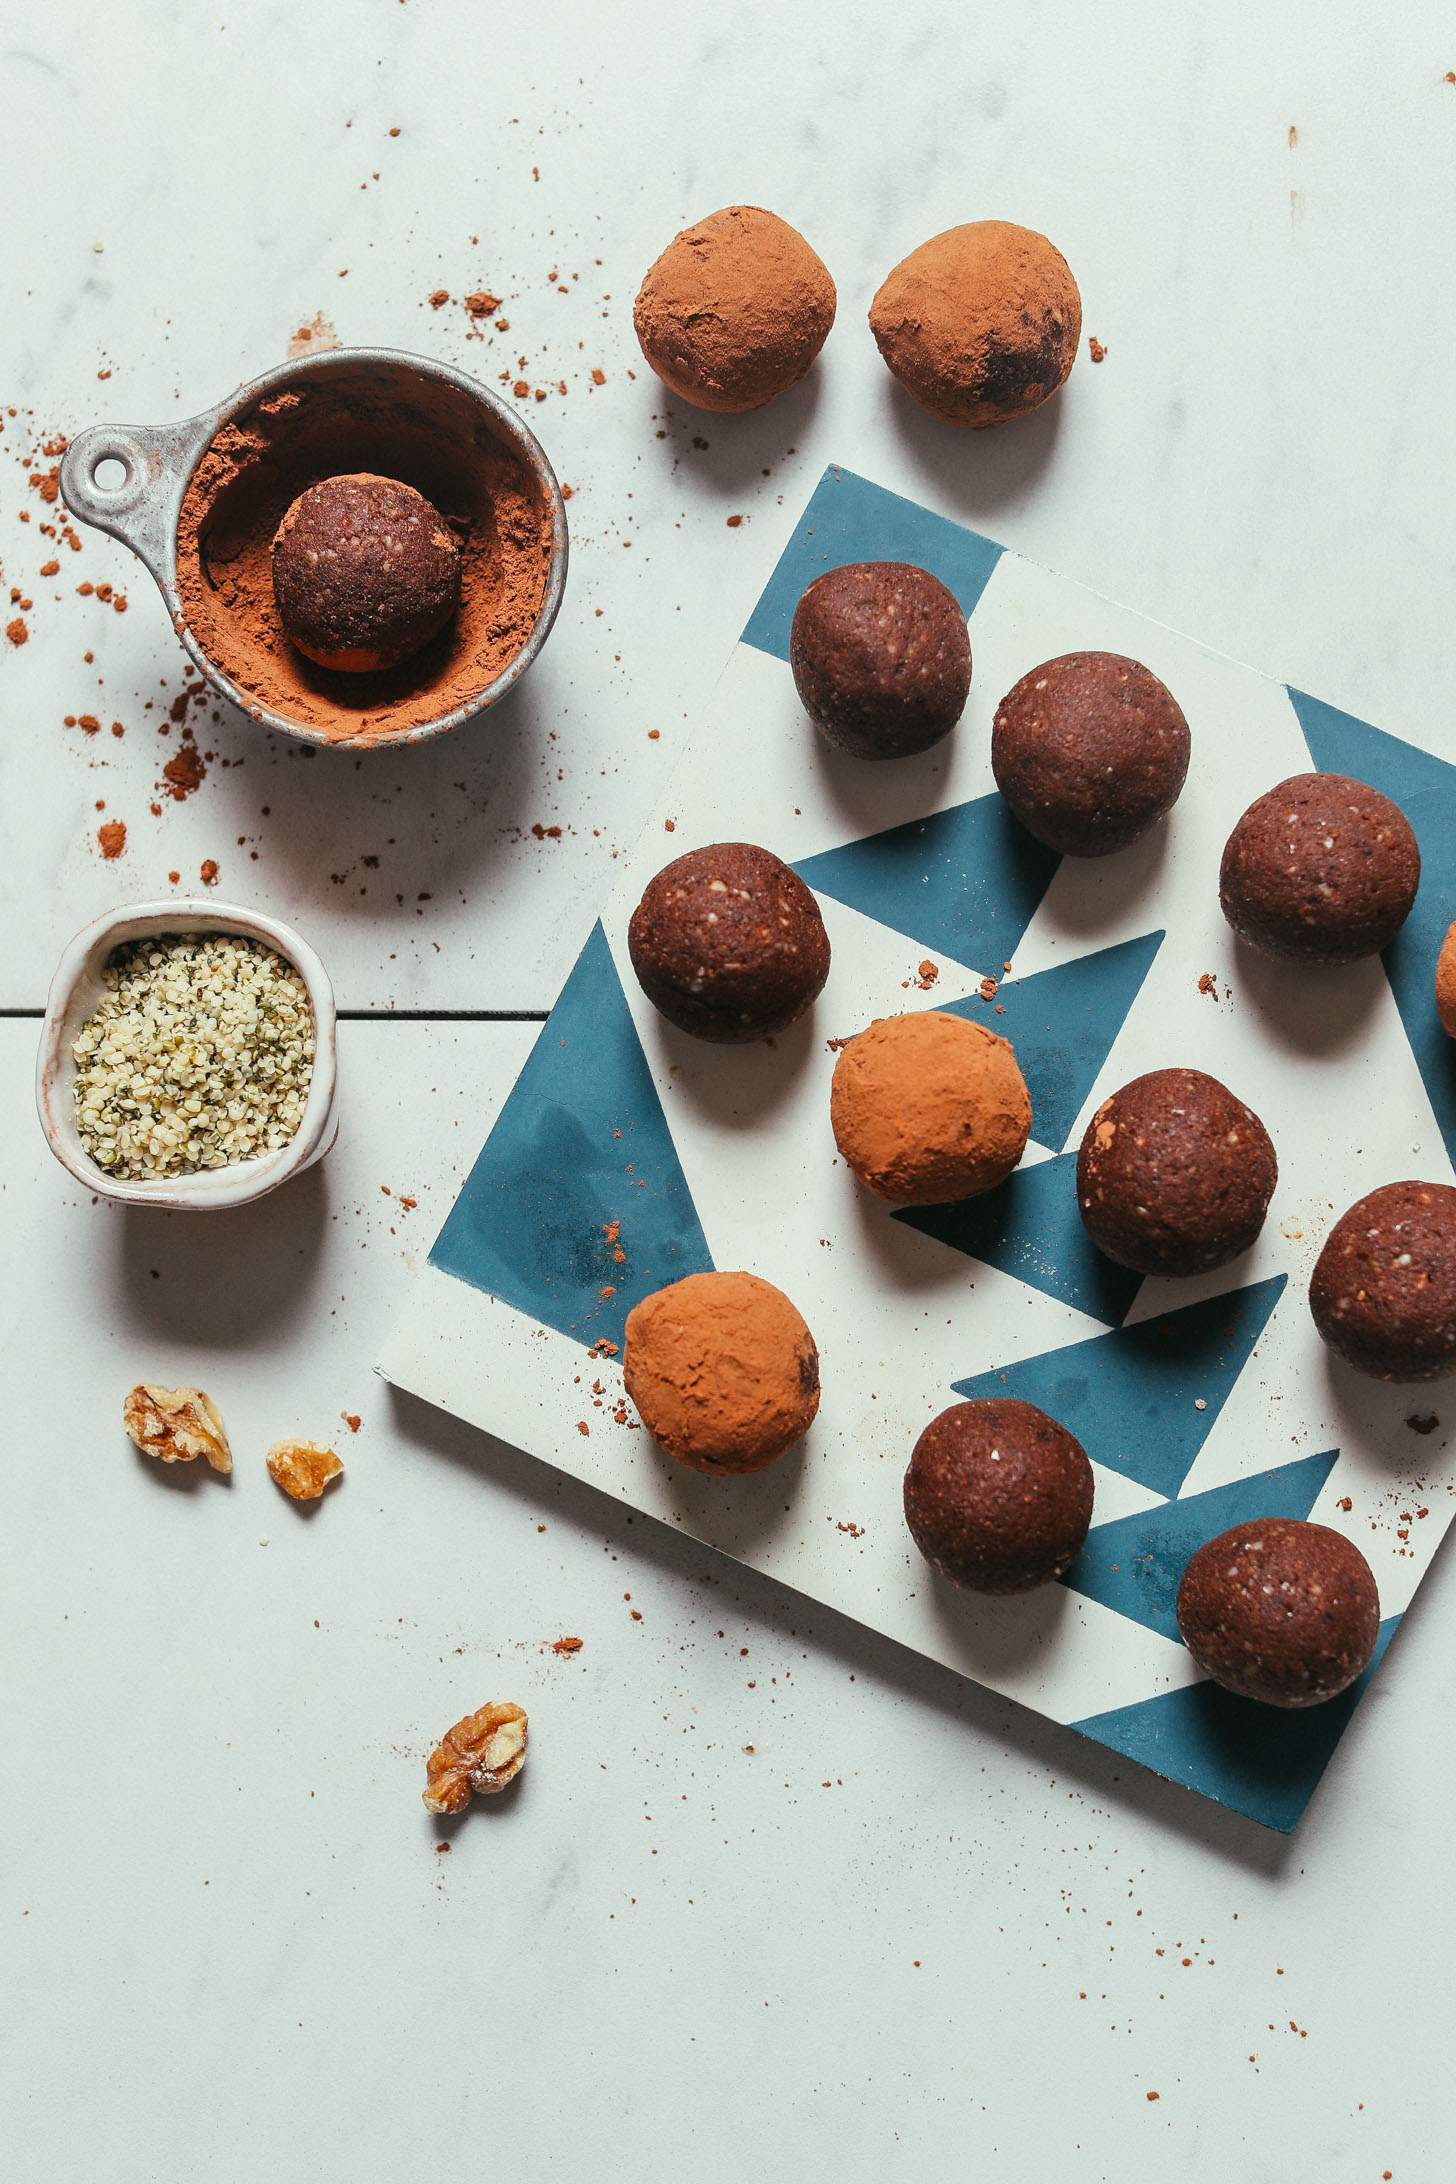 Tile with Brownie Bliss Balls beside measuring cups of hemp seeds and cacao powder for rolling